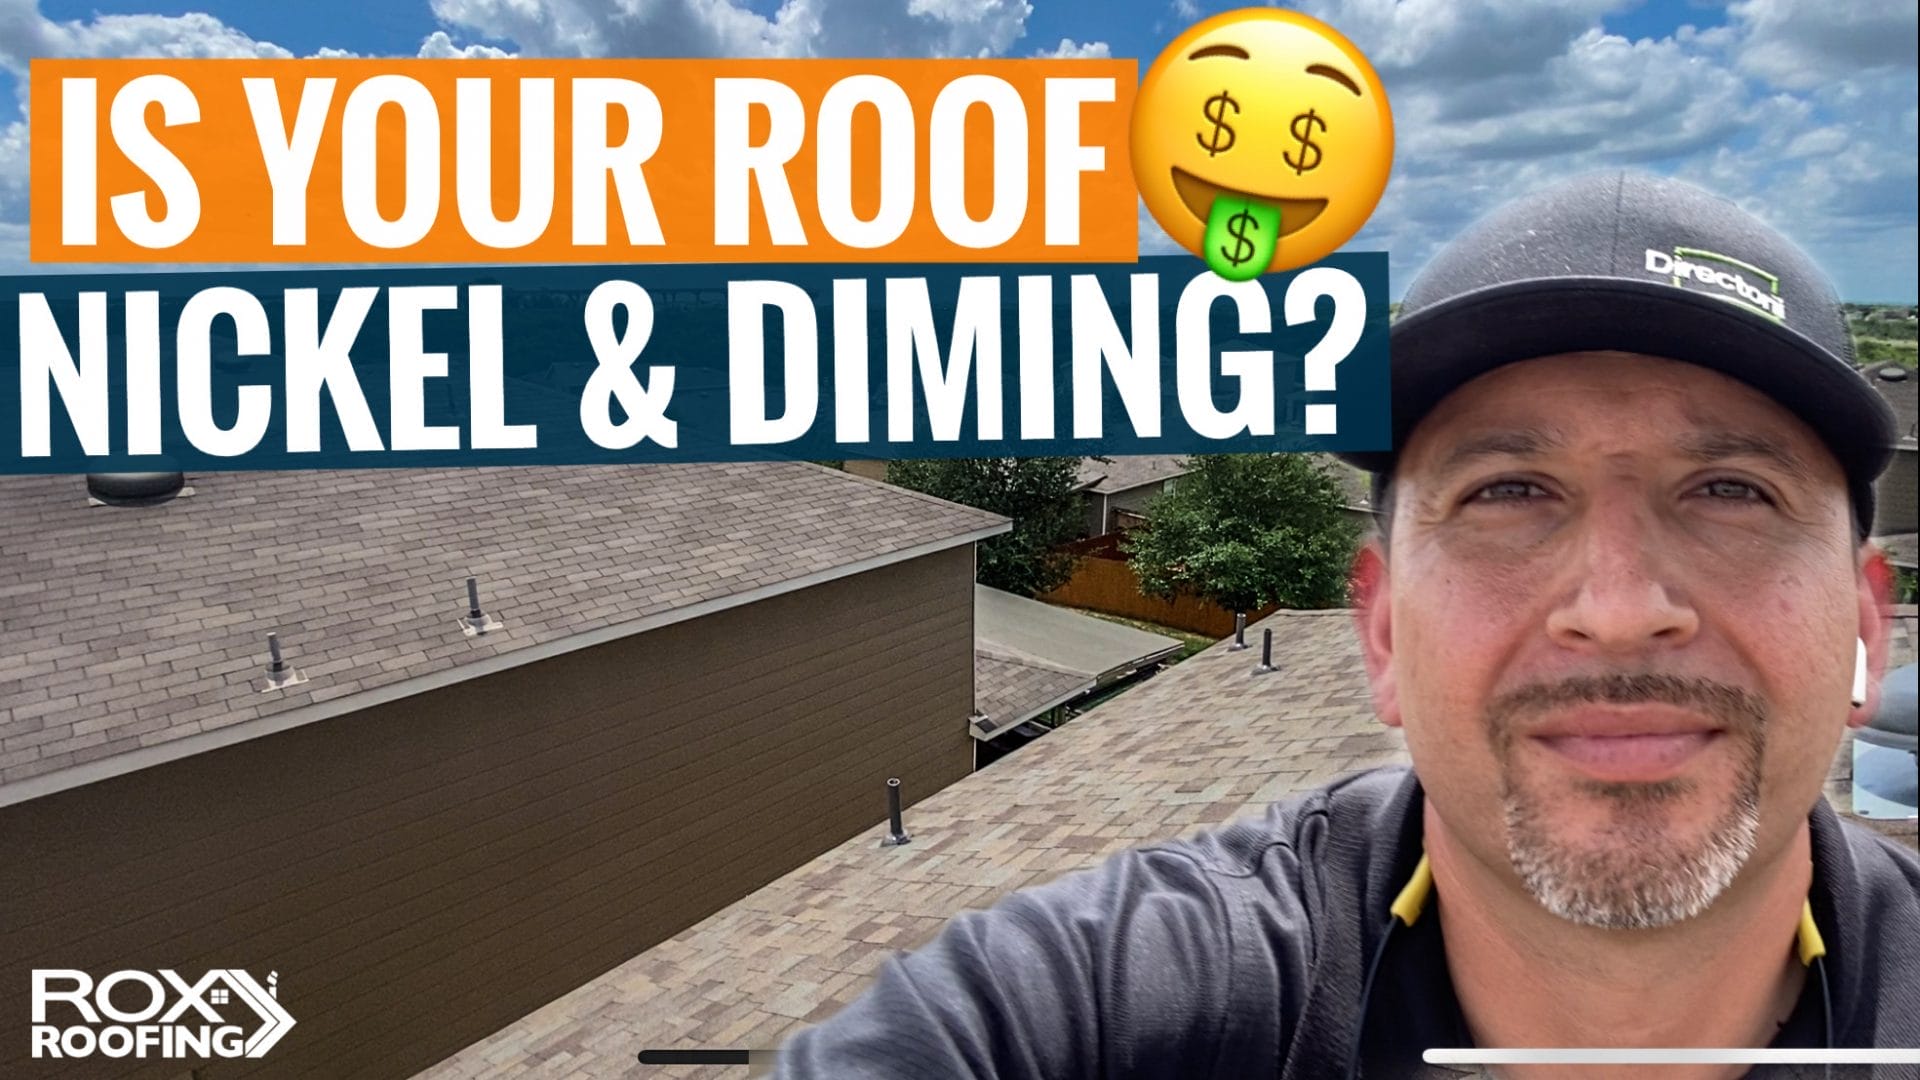 Roof nickel and diming